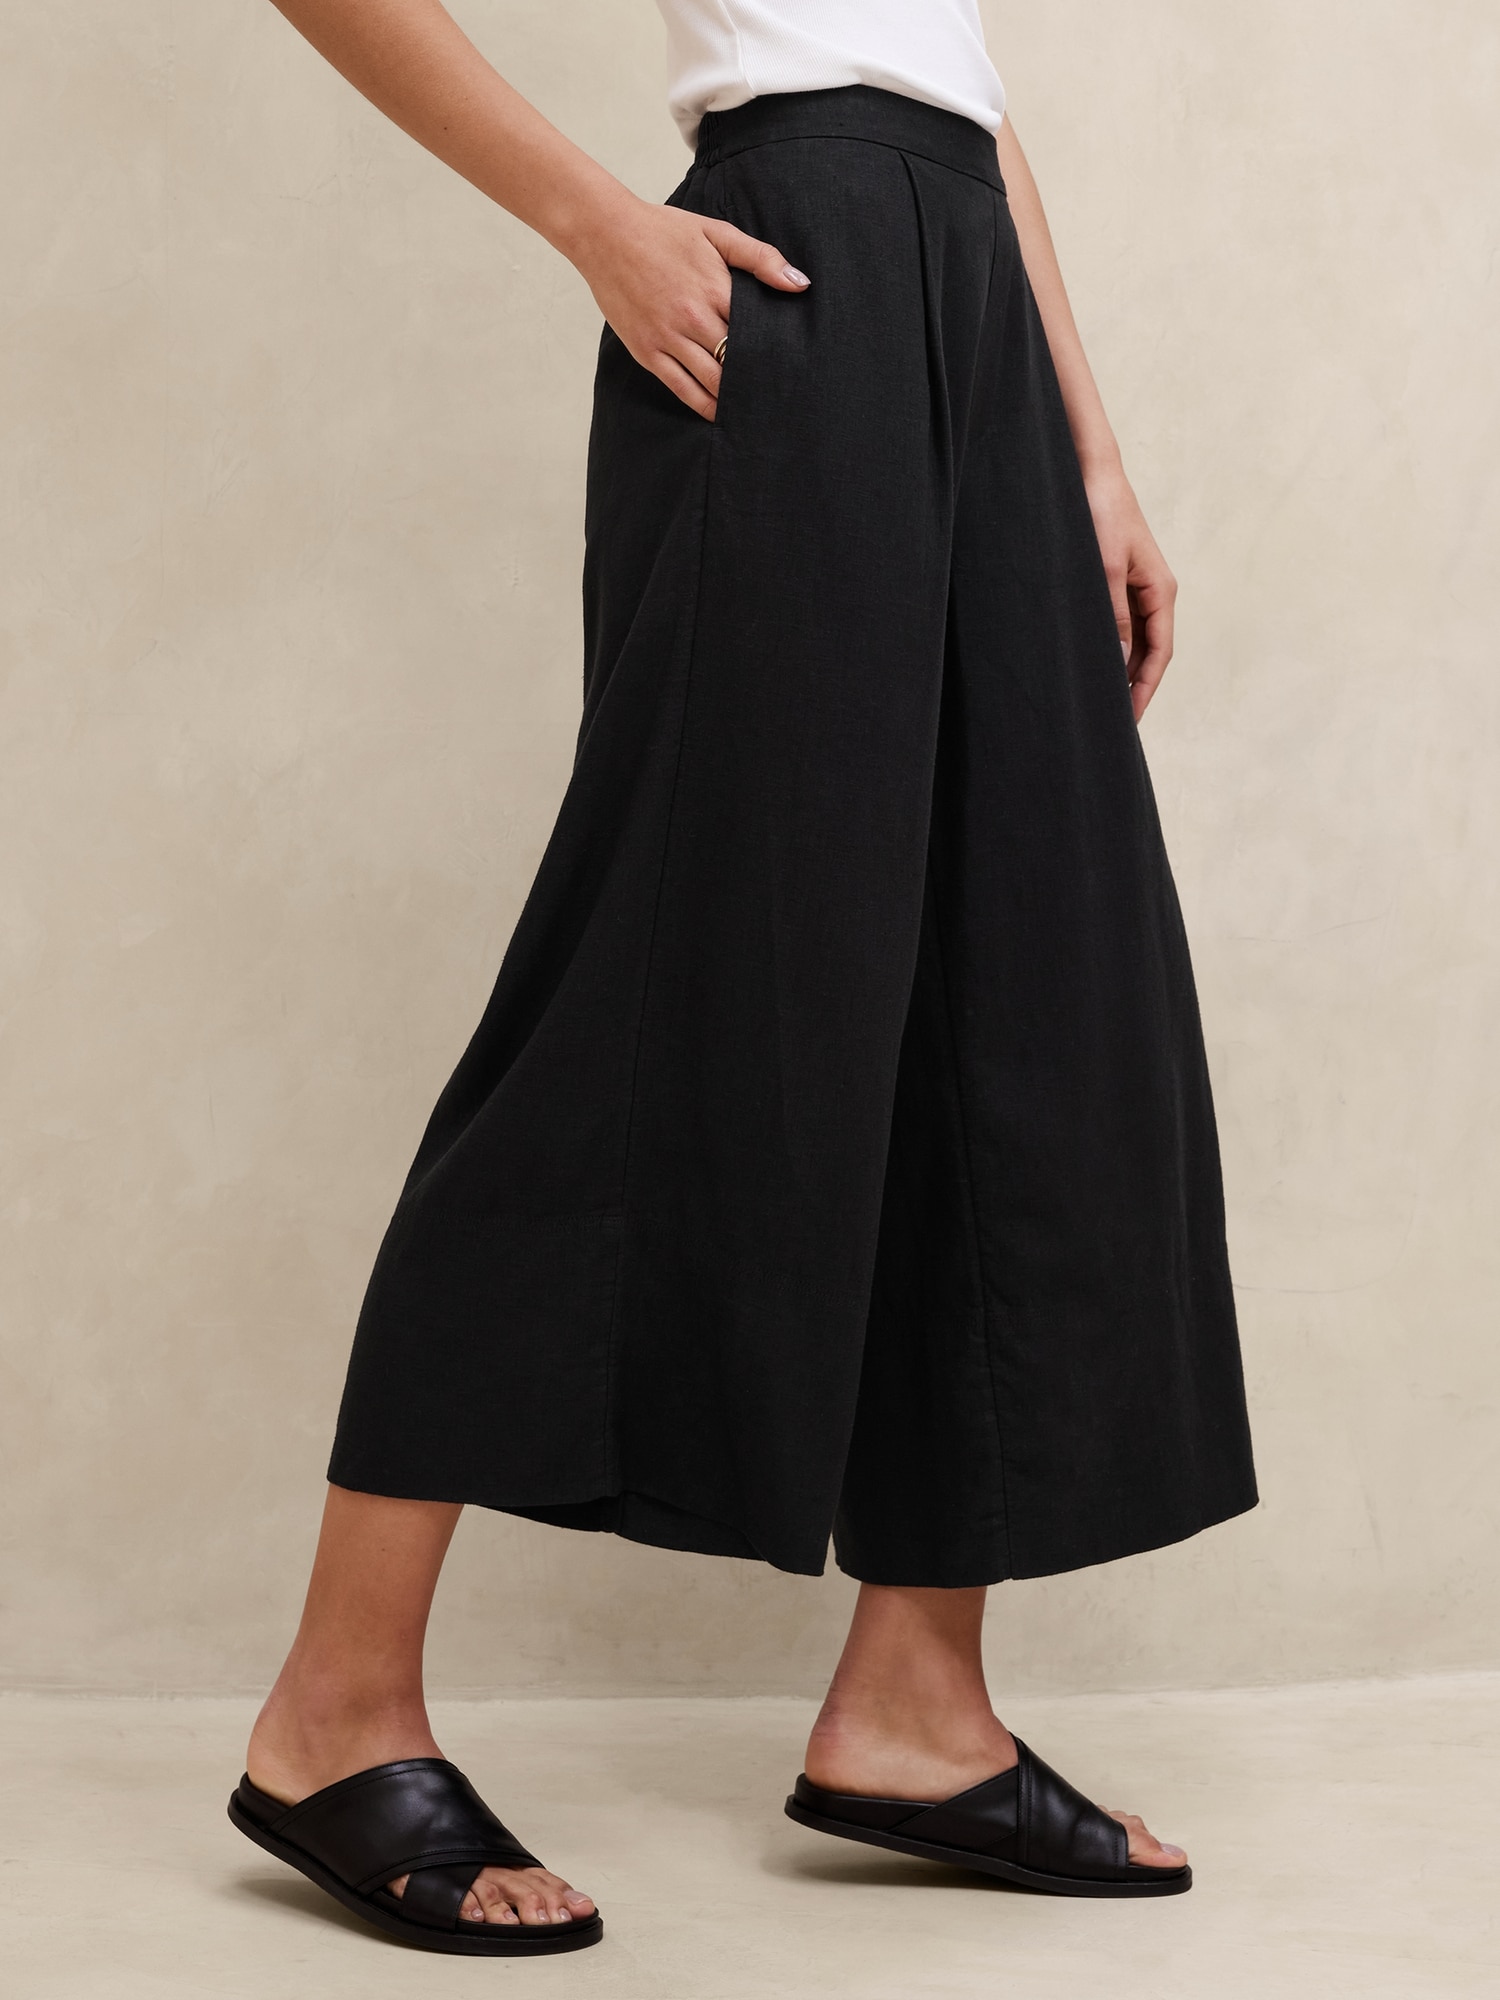 Cropped Trousers for Women